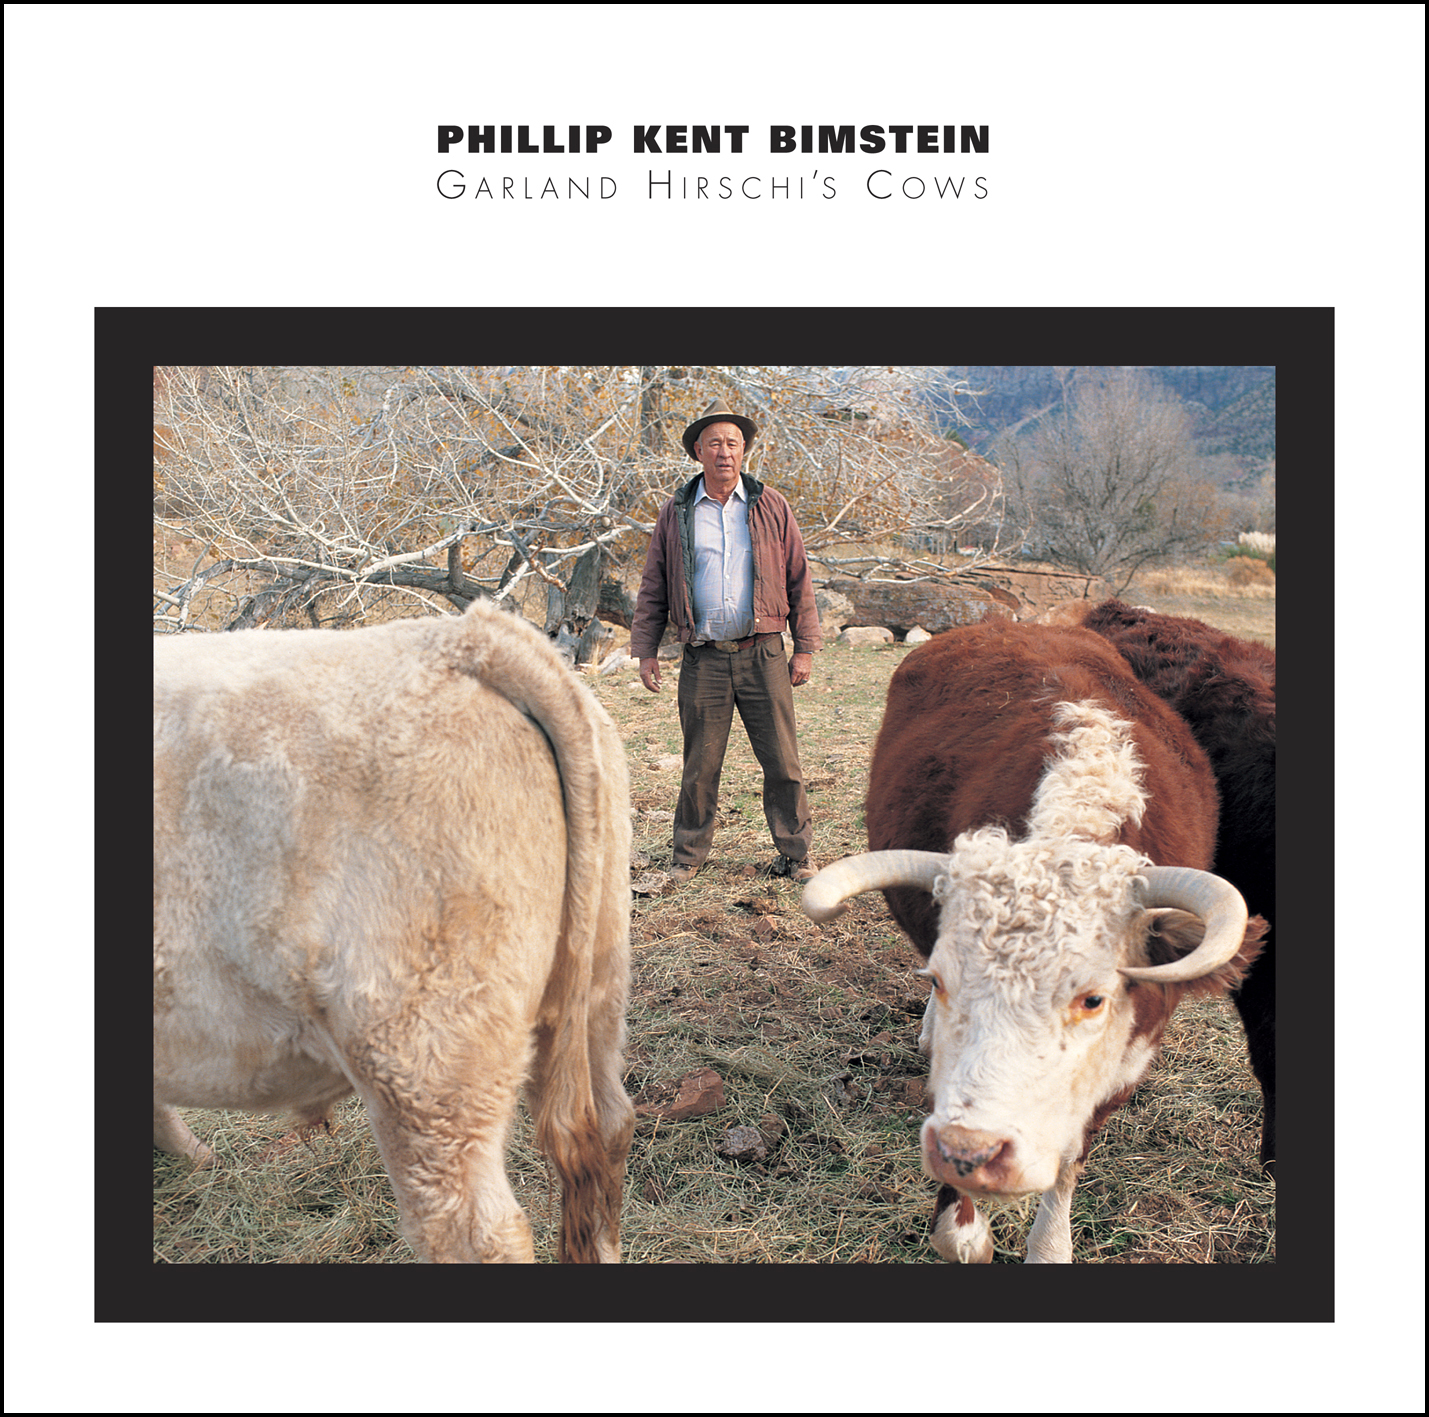 The cover for Philip Bimstein's Starkland CD Garland Hirschi's Cows which is a photo of a farmer with a pair of cows.